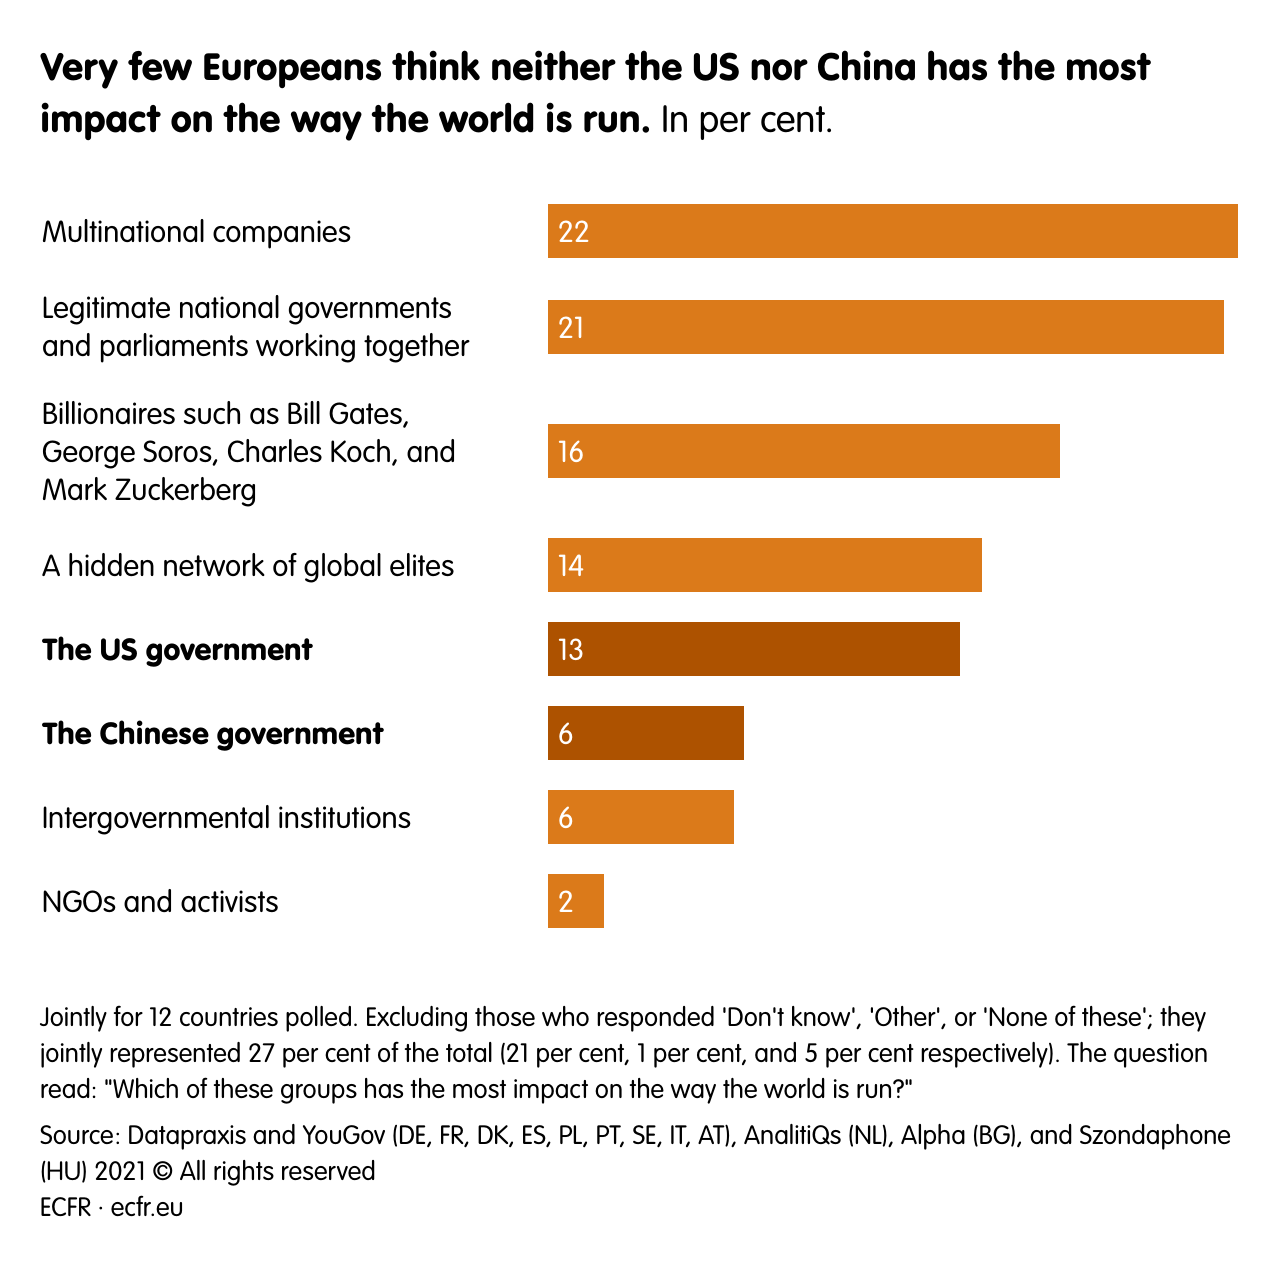 Very few Europeans think neither the US nor China has the most impact on the way the world is run.